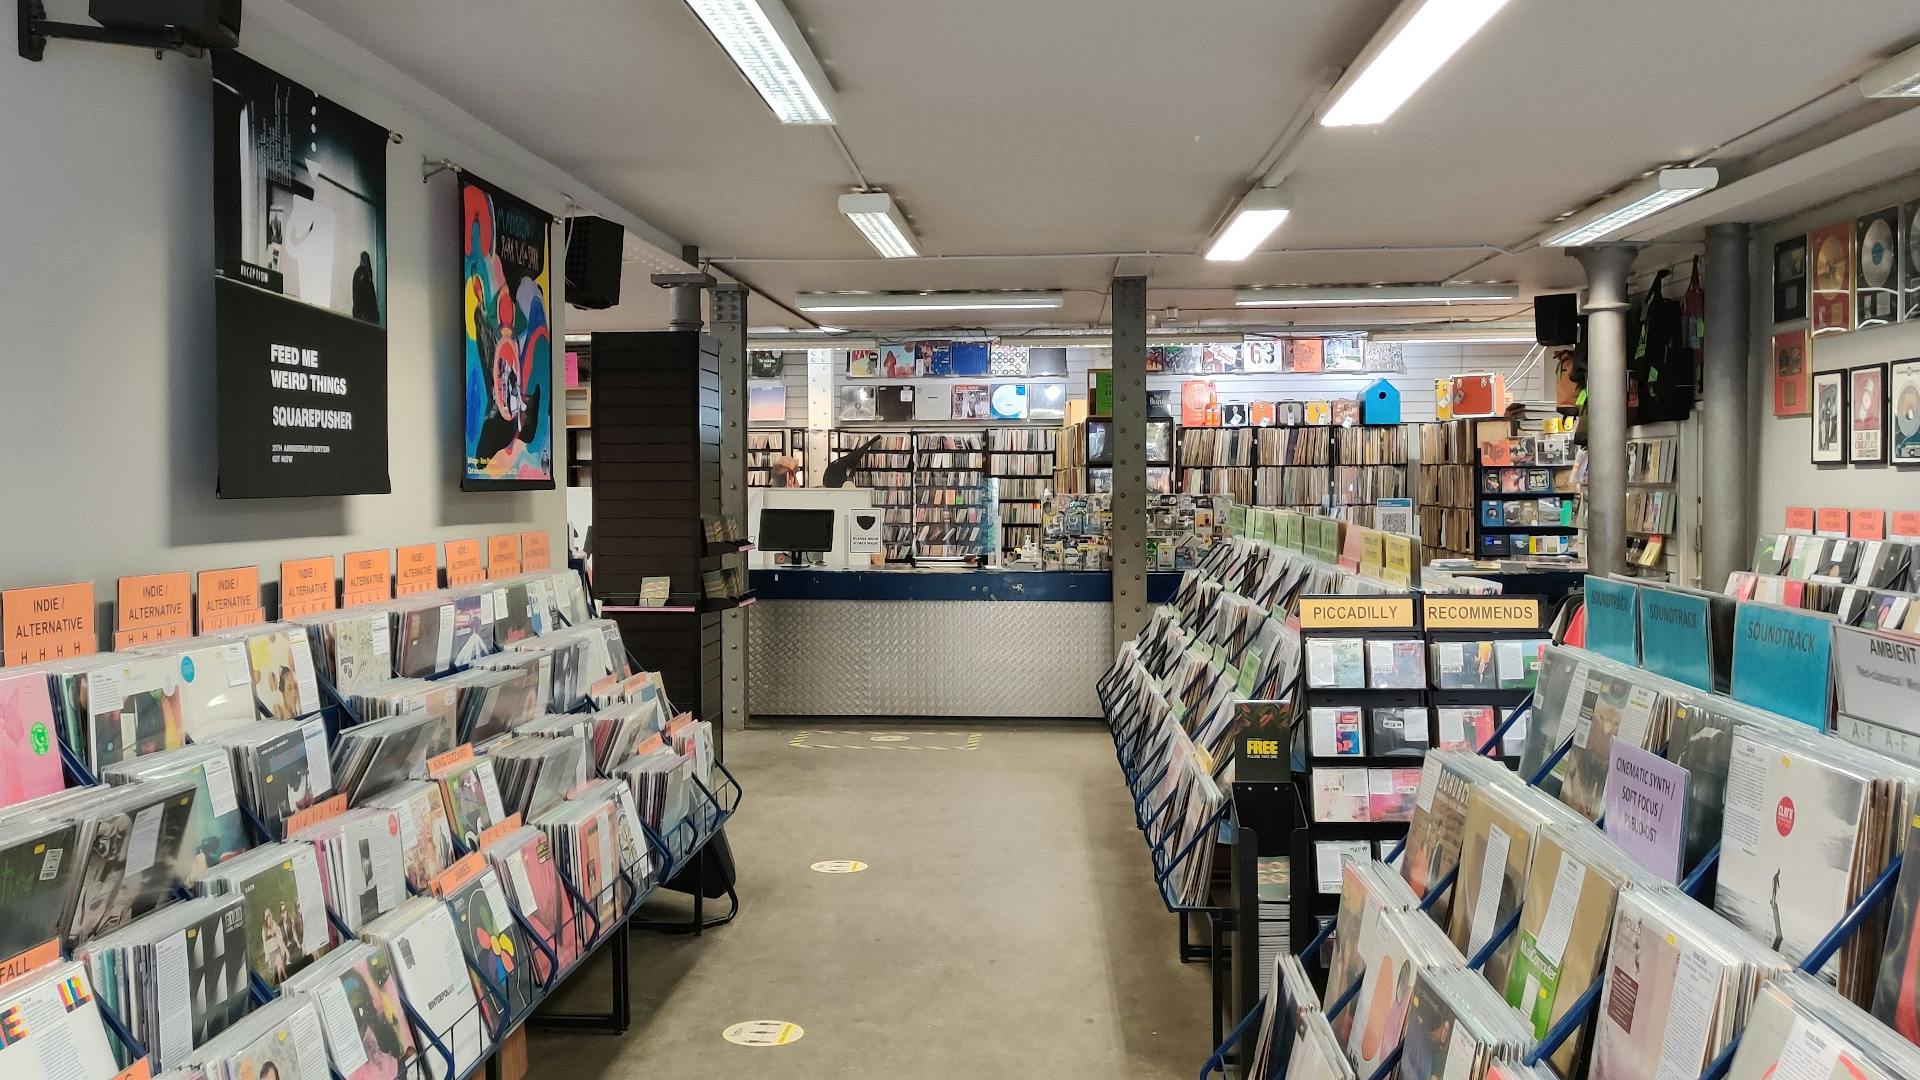 Piccadilly Records recommends: Khrungabin + Leon Bridges, The Soundcarriers, Pneumatic Tubes, Sunn O))) + King Hannah